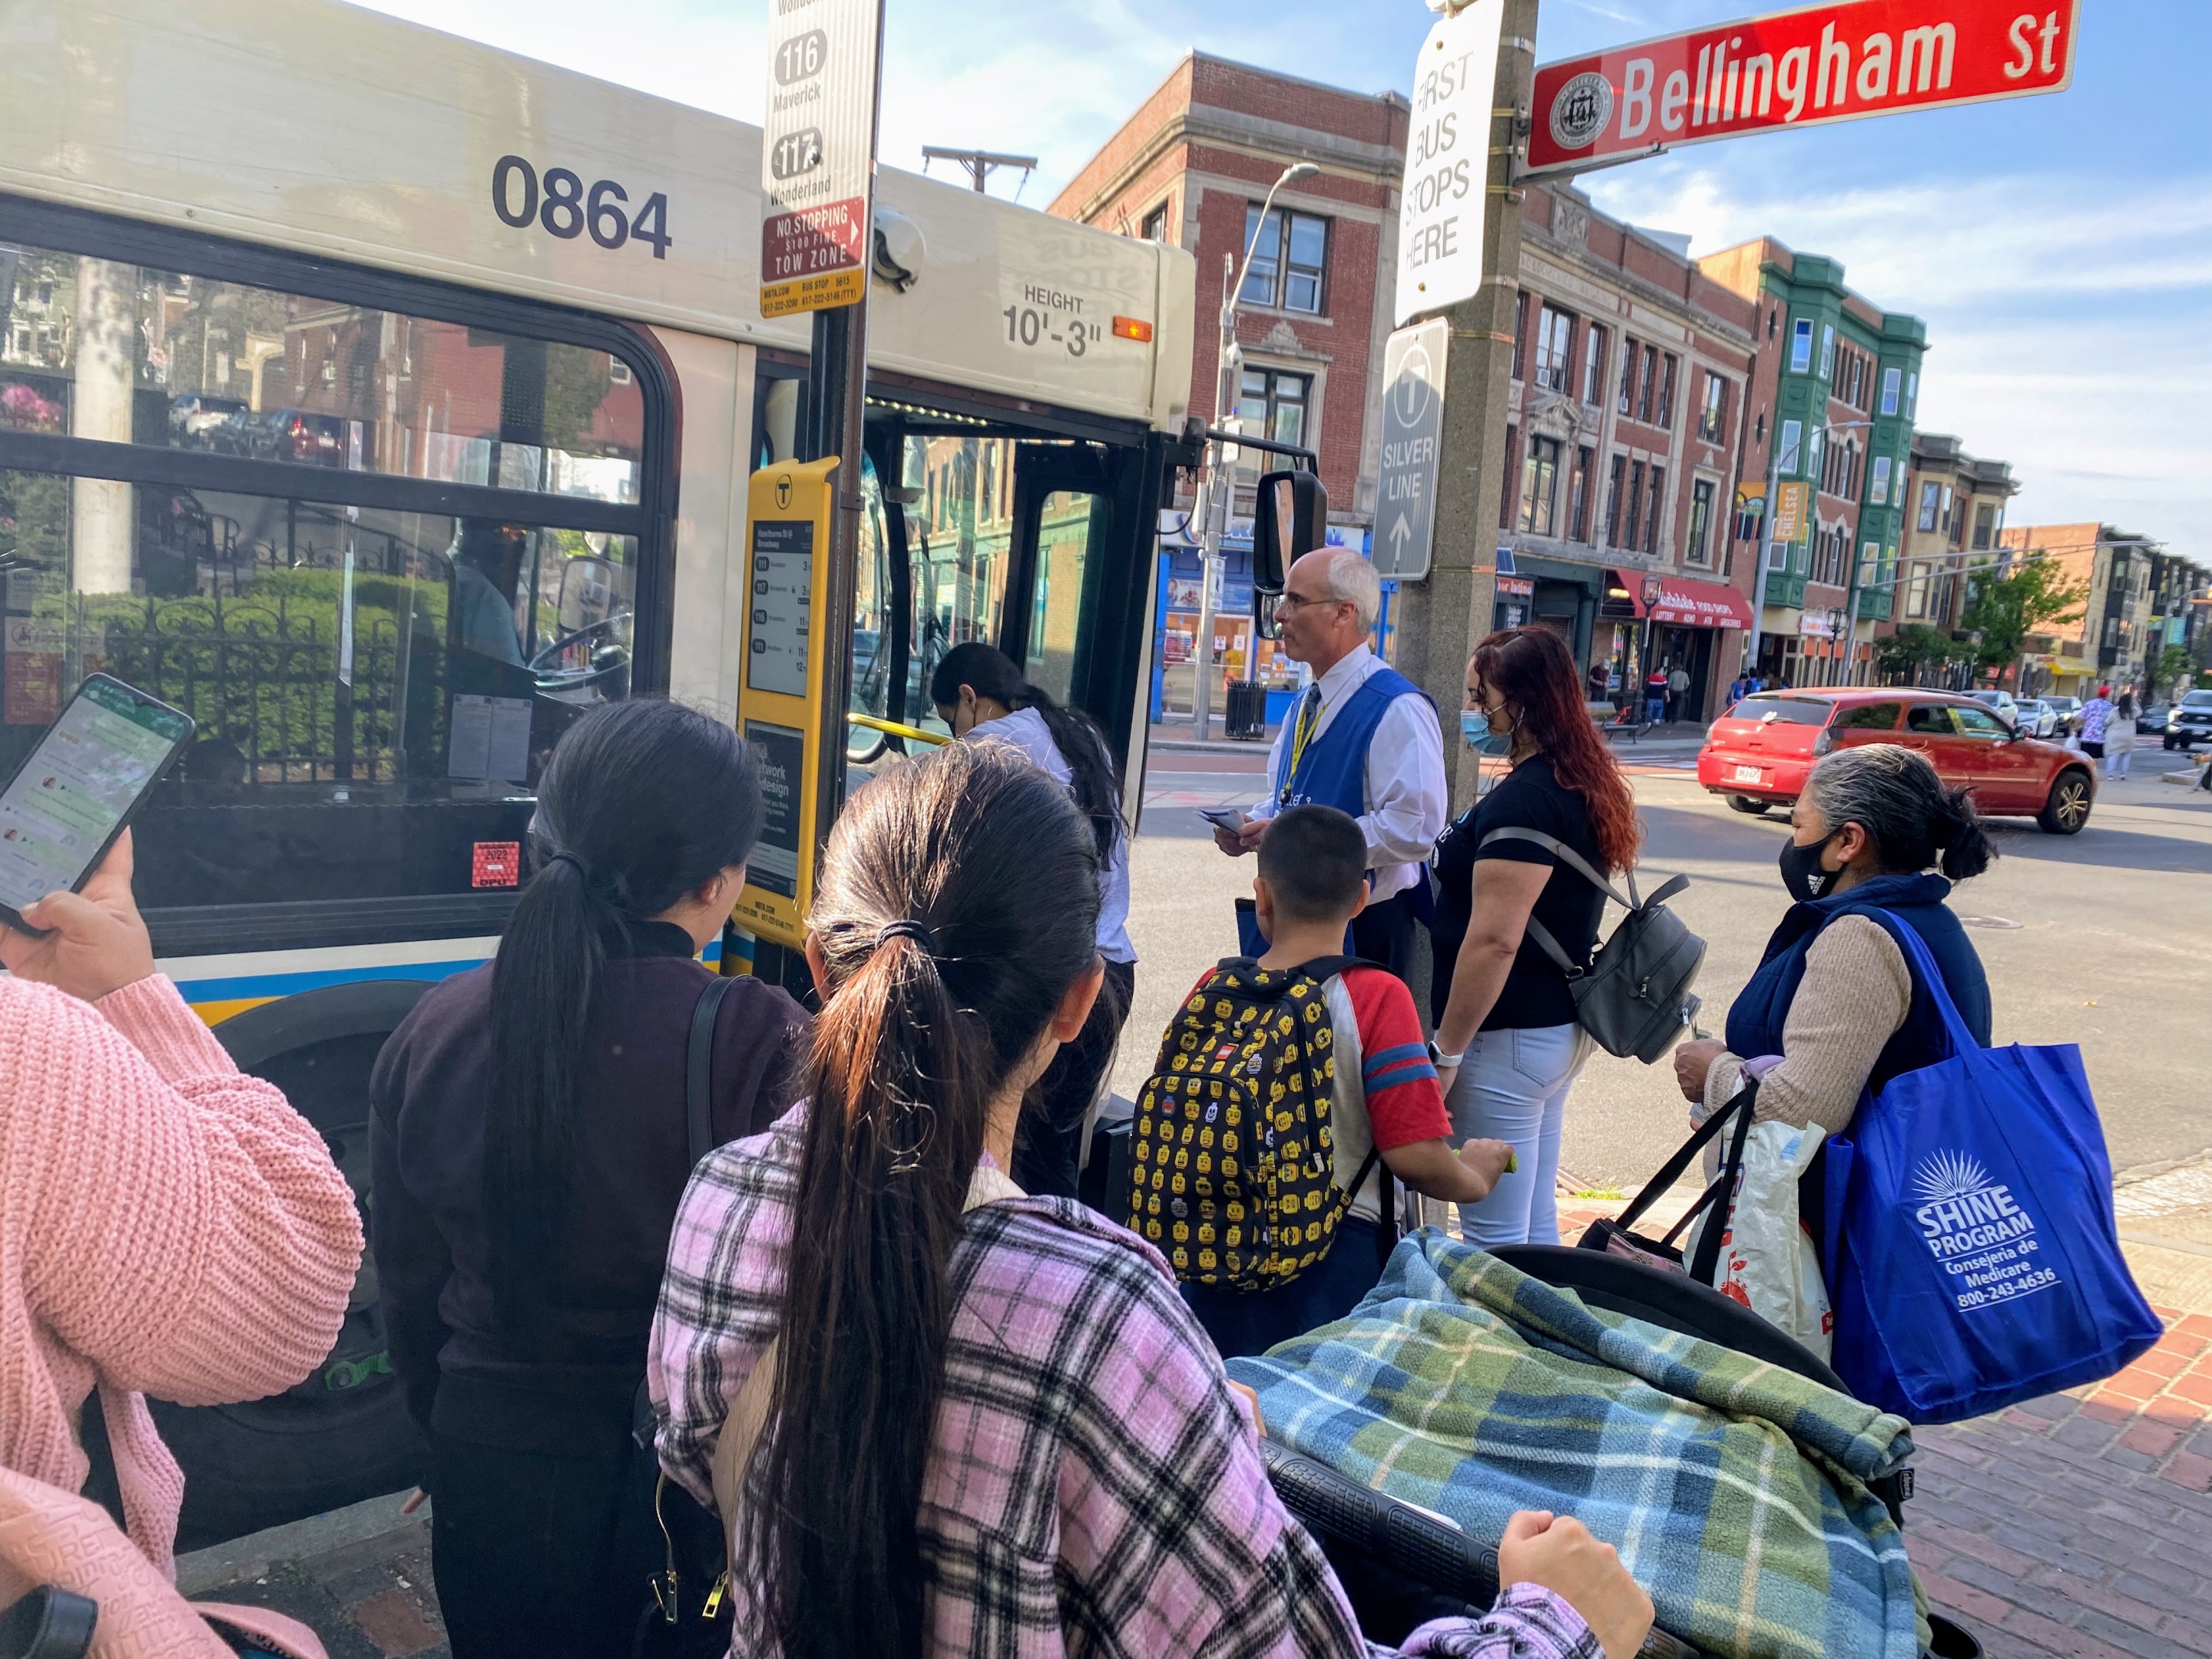 Riders in Chelsea and an MBTA outreach worker wait to board the bus at Bellingham Street in downtown Chelsea. T staff shared information about the Bus Network Redesign project with members onboard.